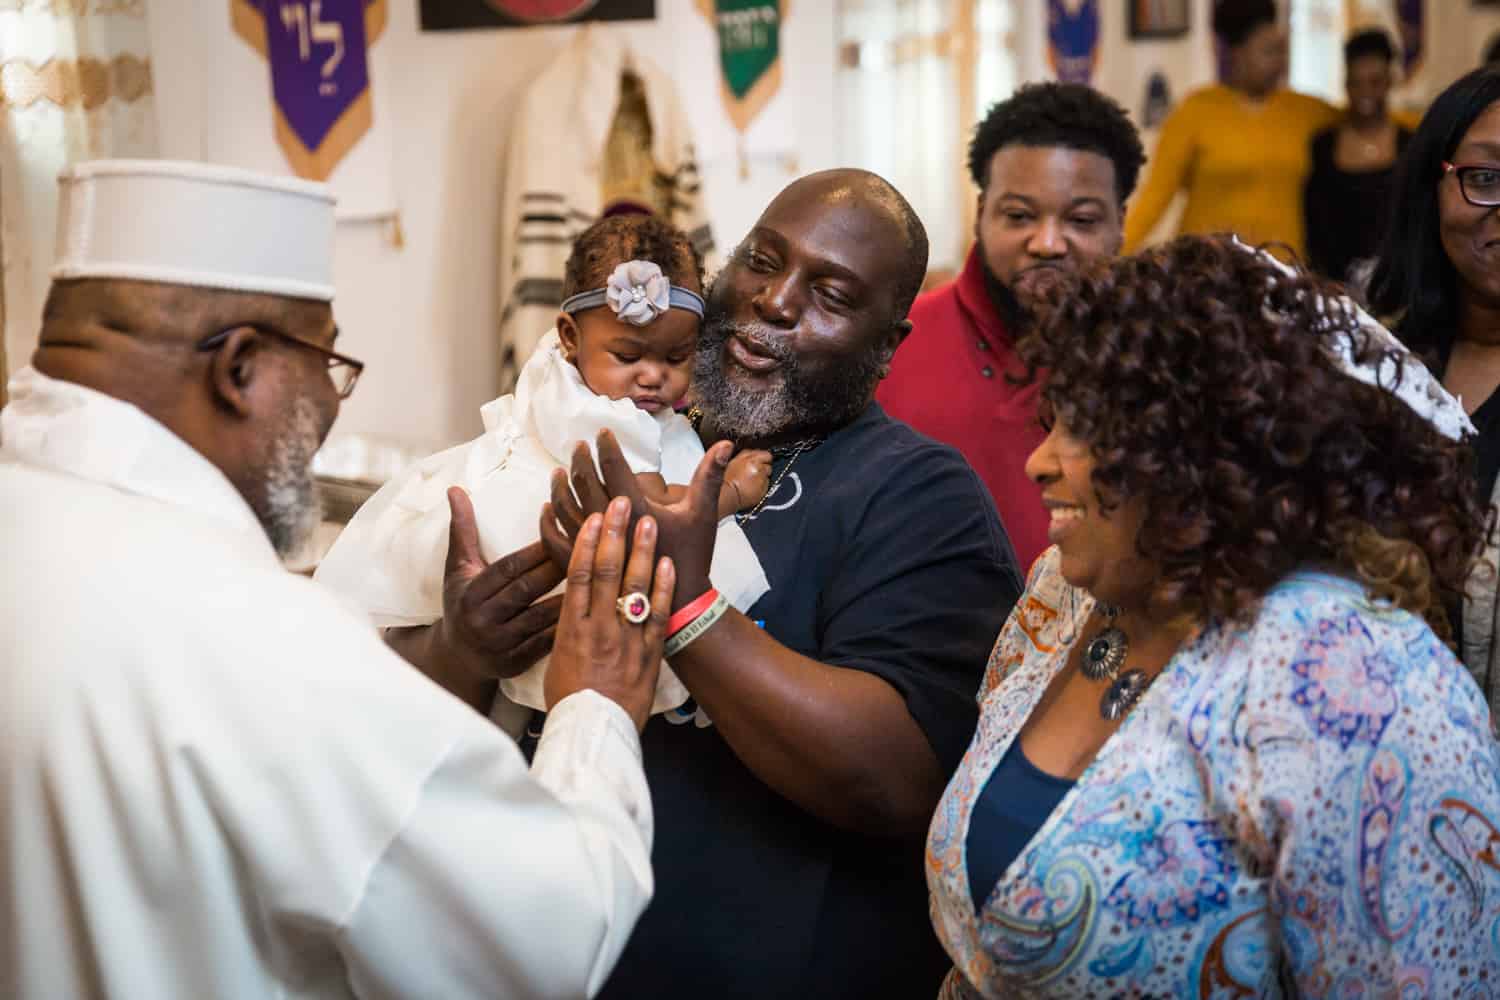 Little baby held by family members during Jamaica christening blessing